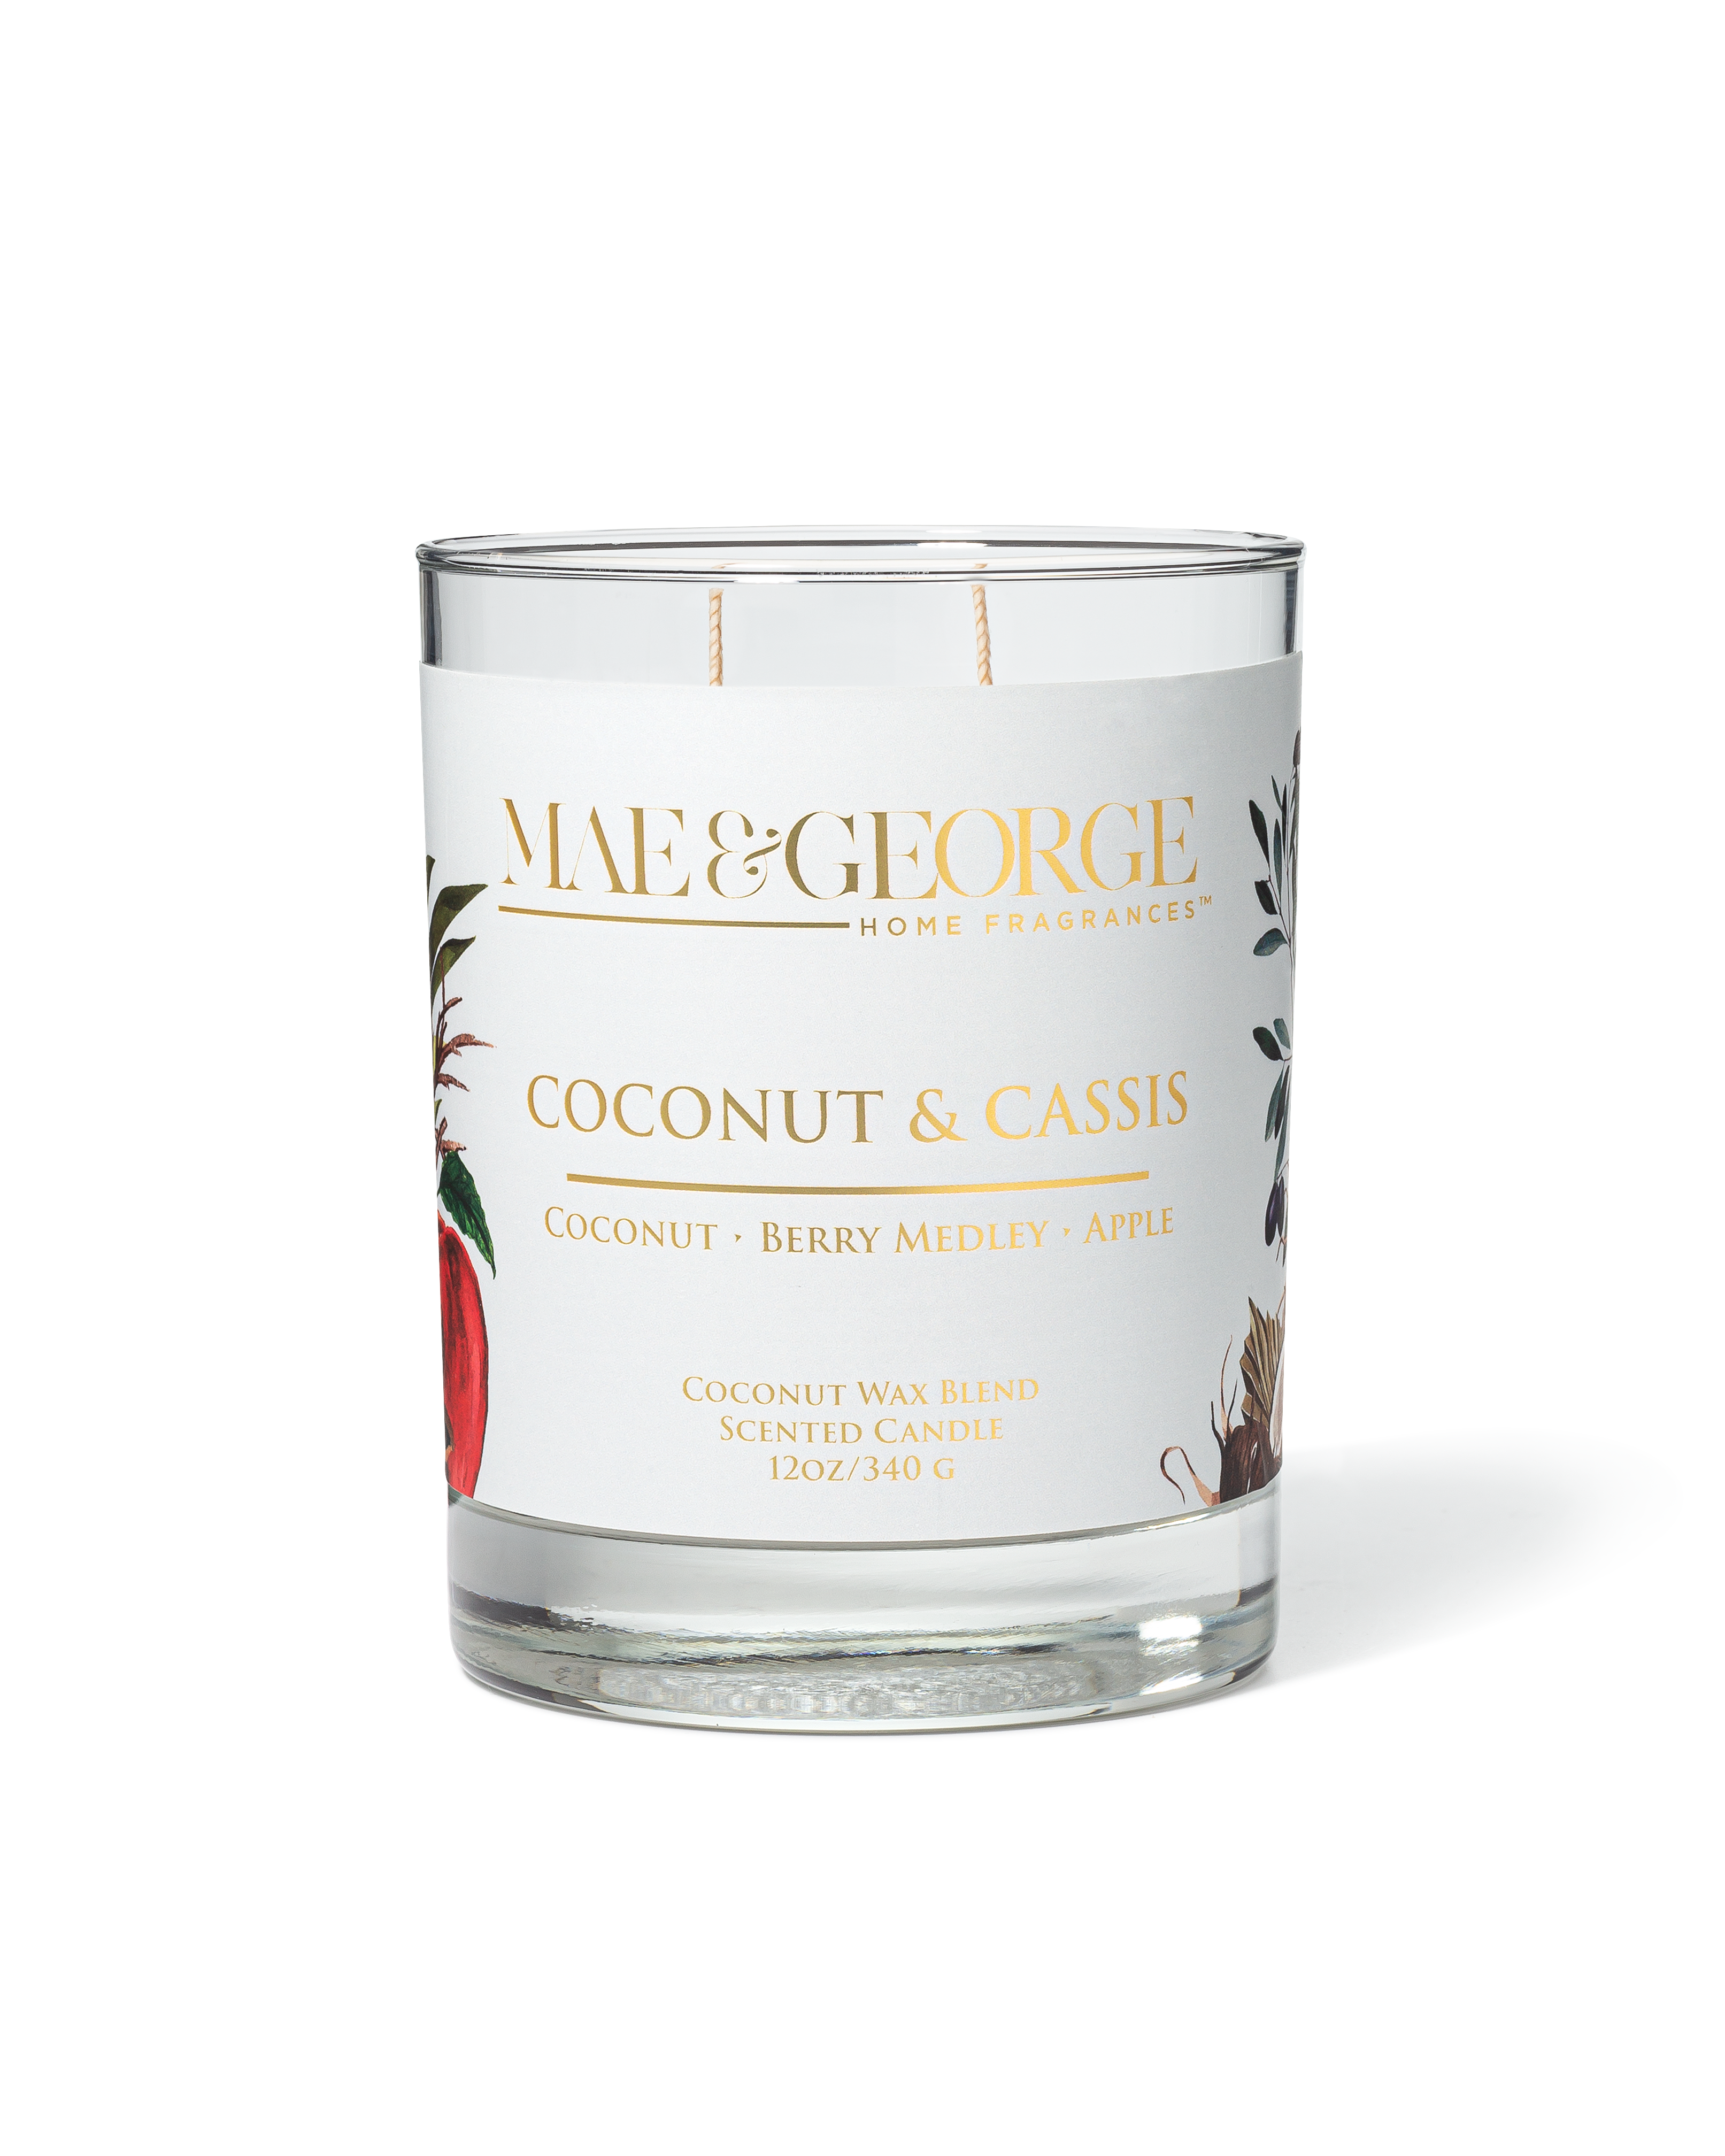 Coconut & Cassis Candle